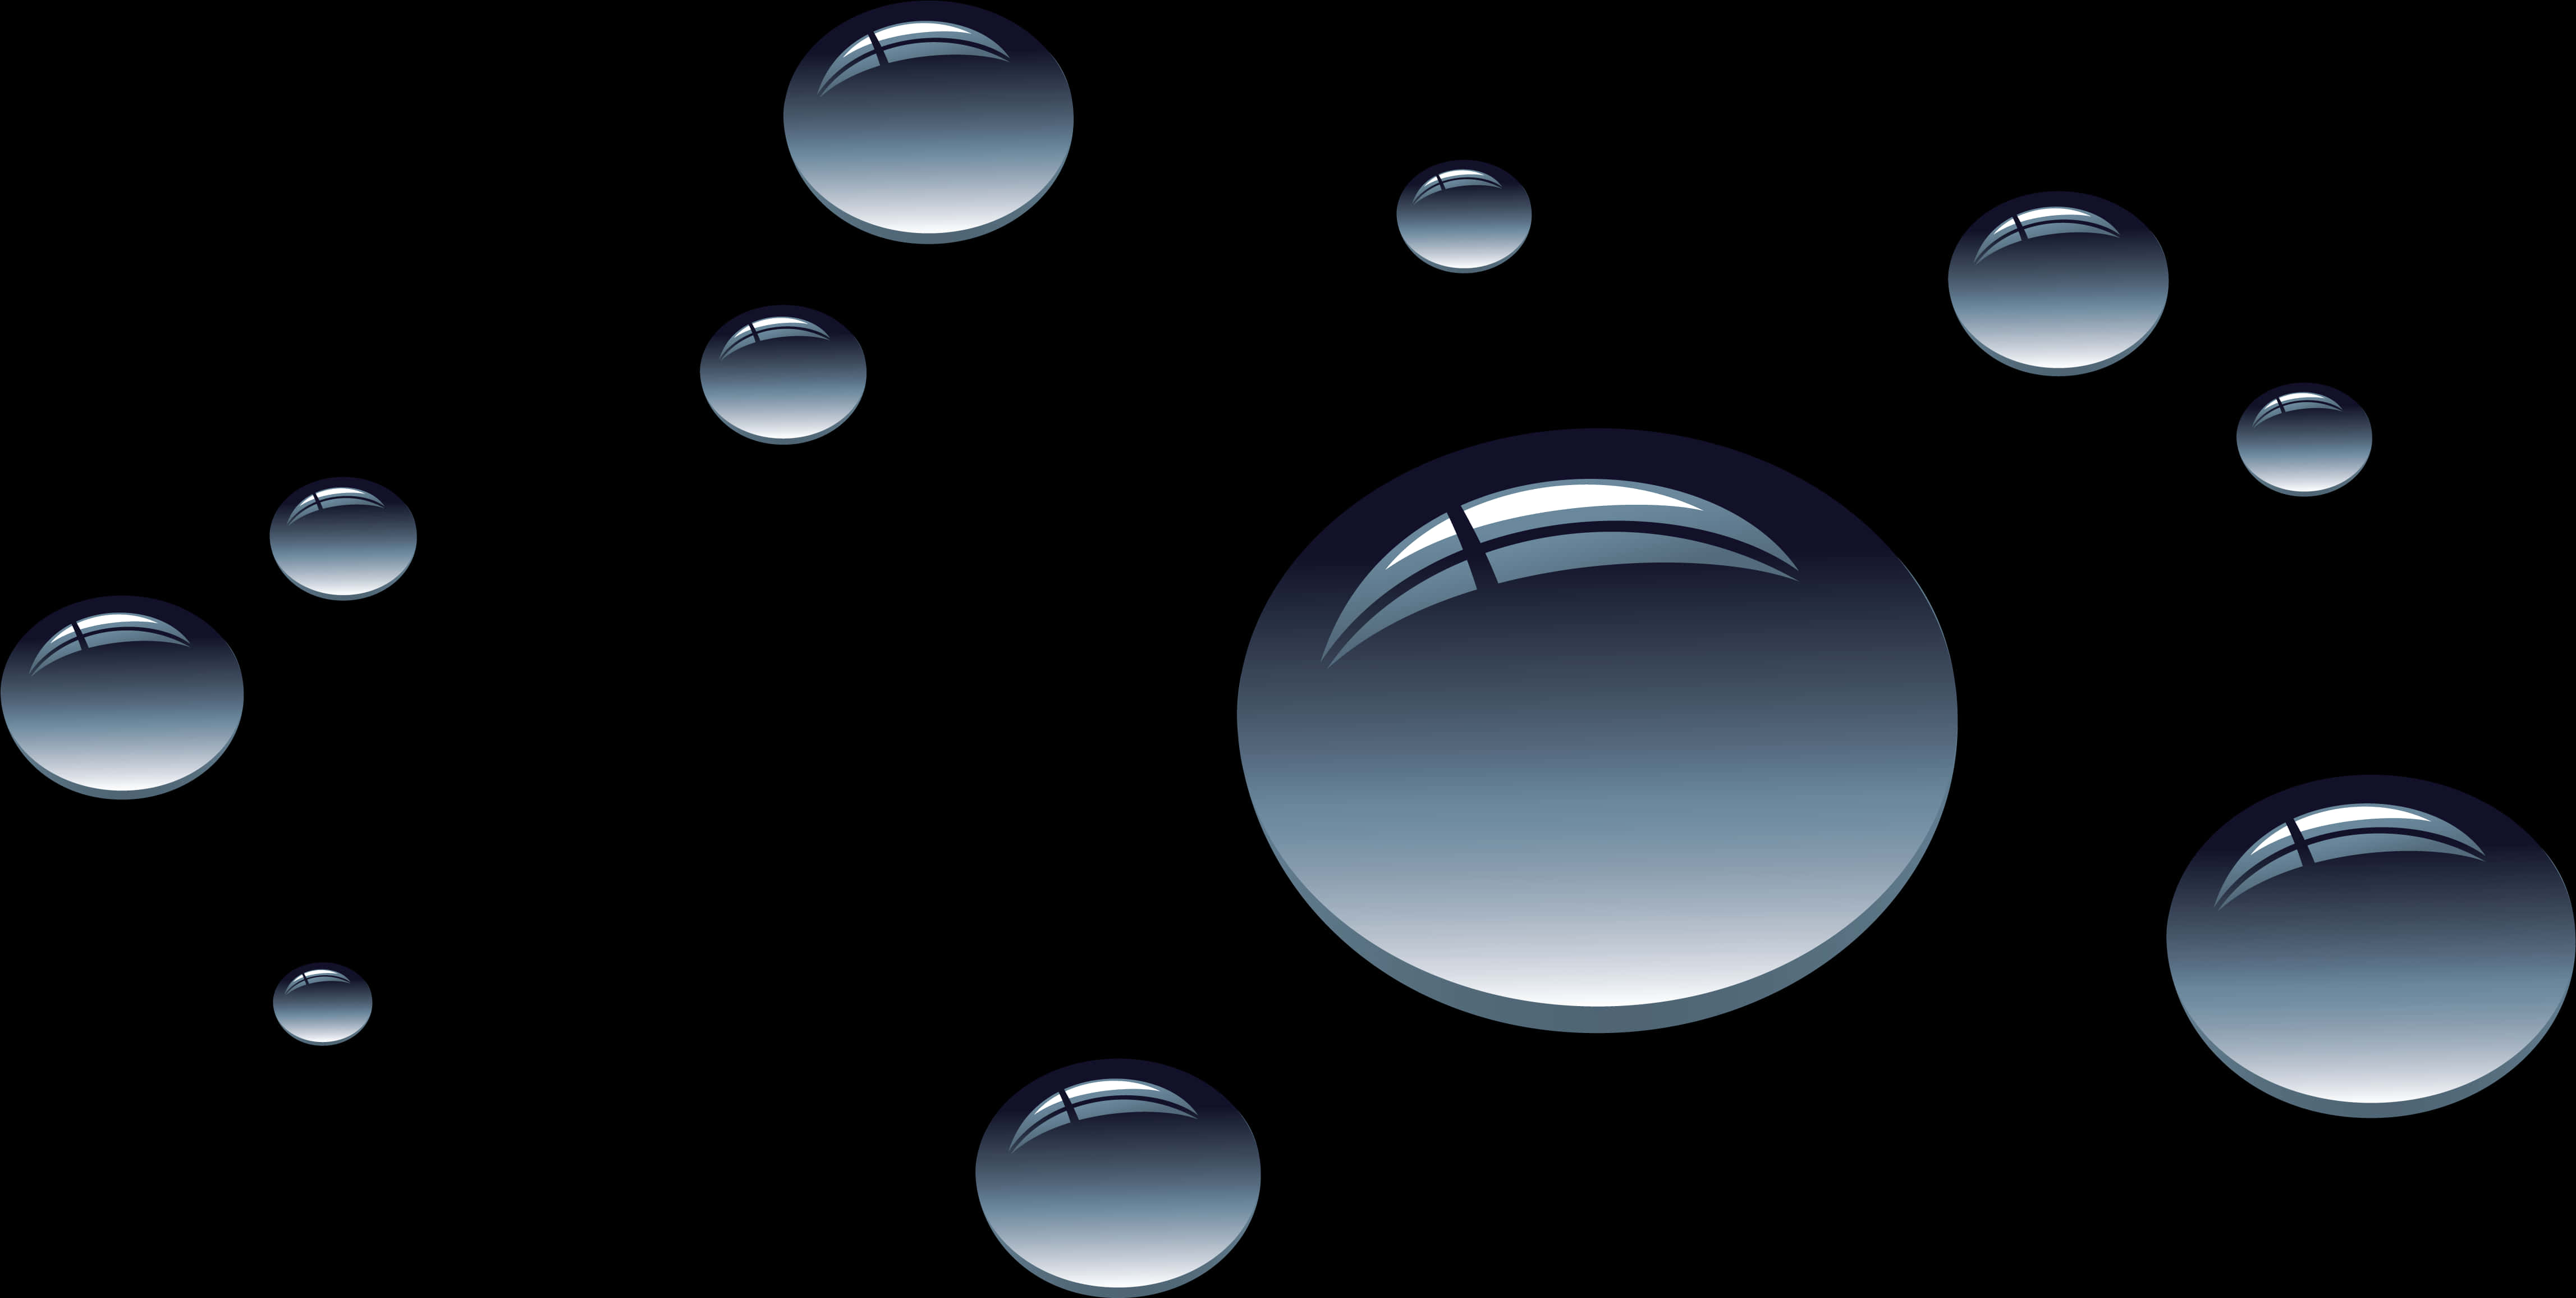 A Group Of Water Droplets On A Black Background